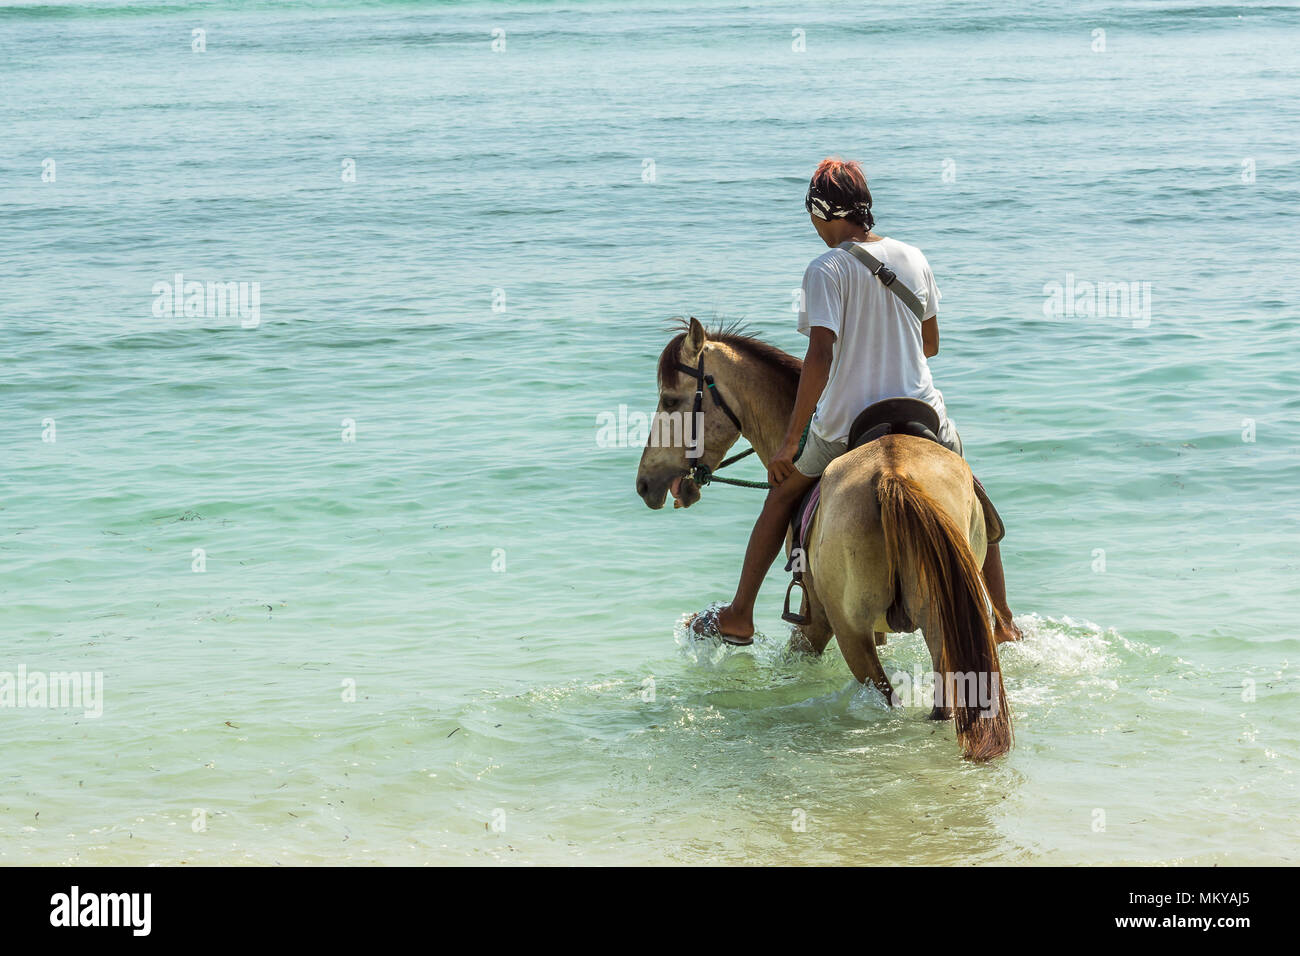 Indonesian man riding a horse in the blue and green shallow water close to the beach, april 24, 2018, Gili Trawangan, Indonesia Stock Photo